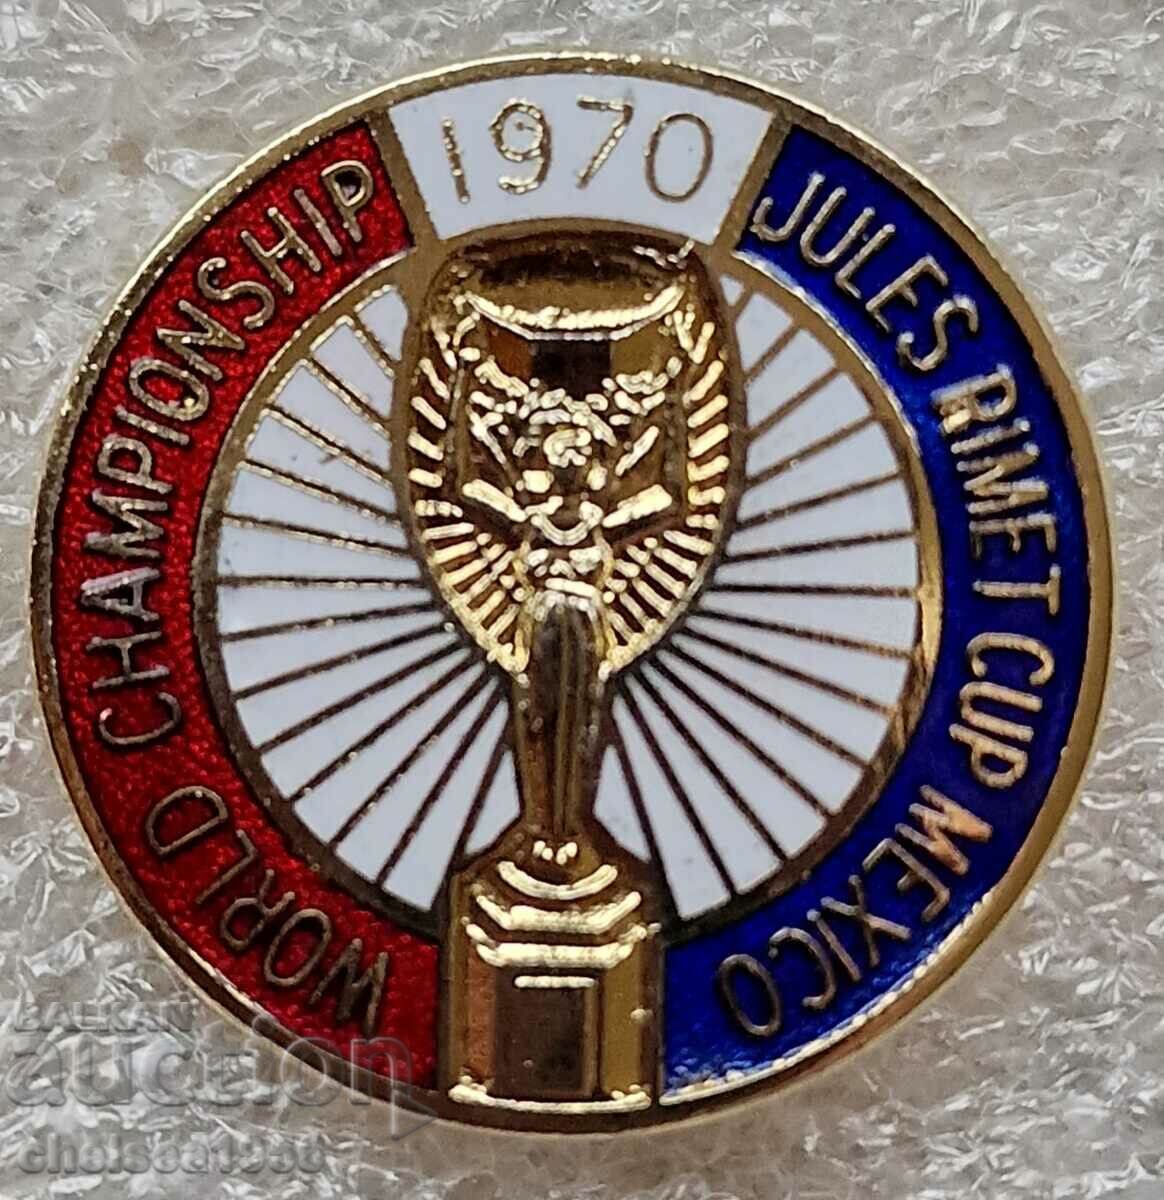 1970 World Cup Badge Made by W. Reeves